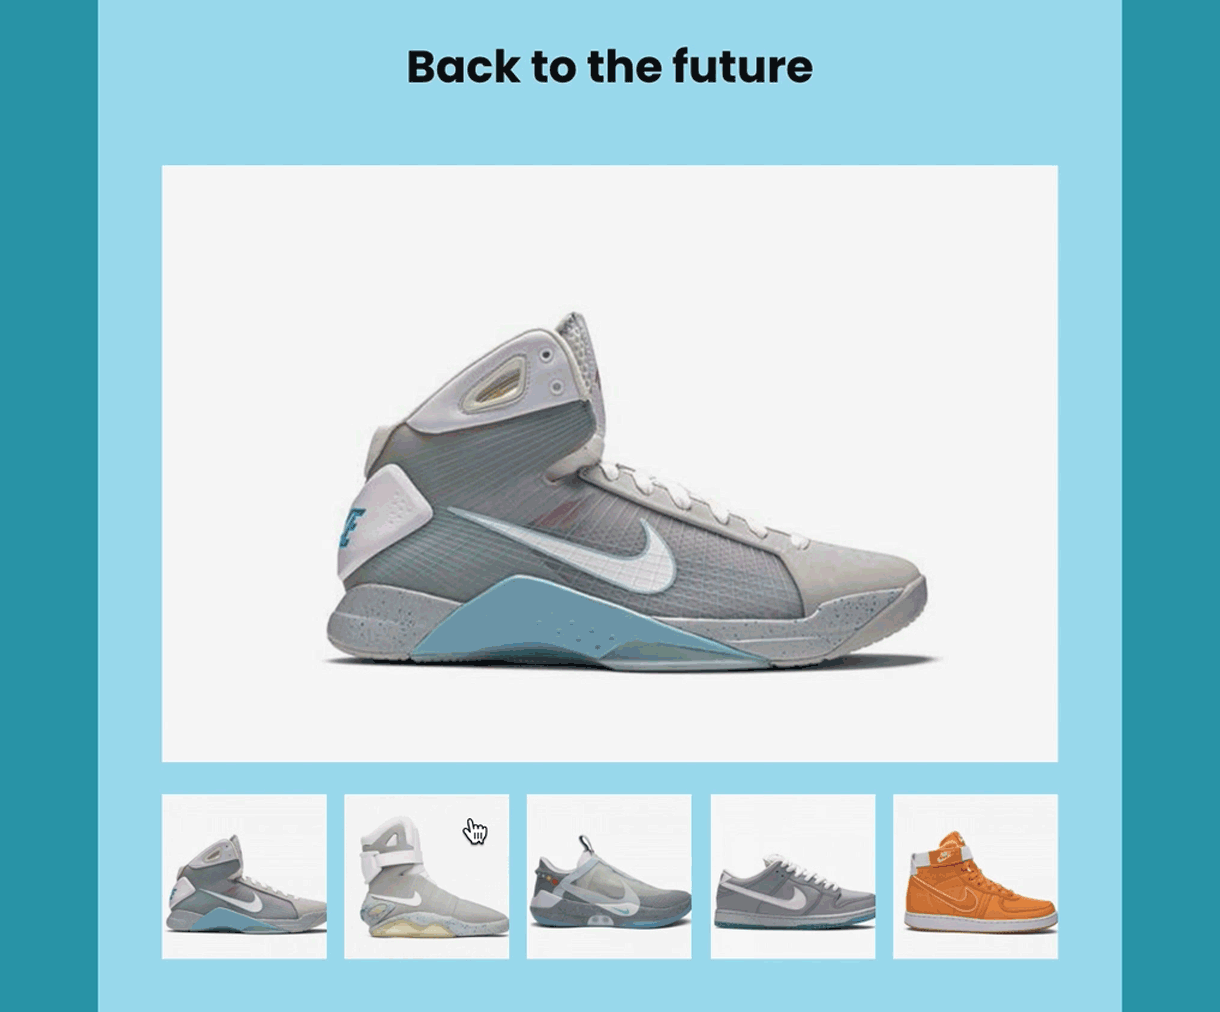 A GIF of an image carousel in MailerLite where readers can click through different images of sneakers